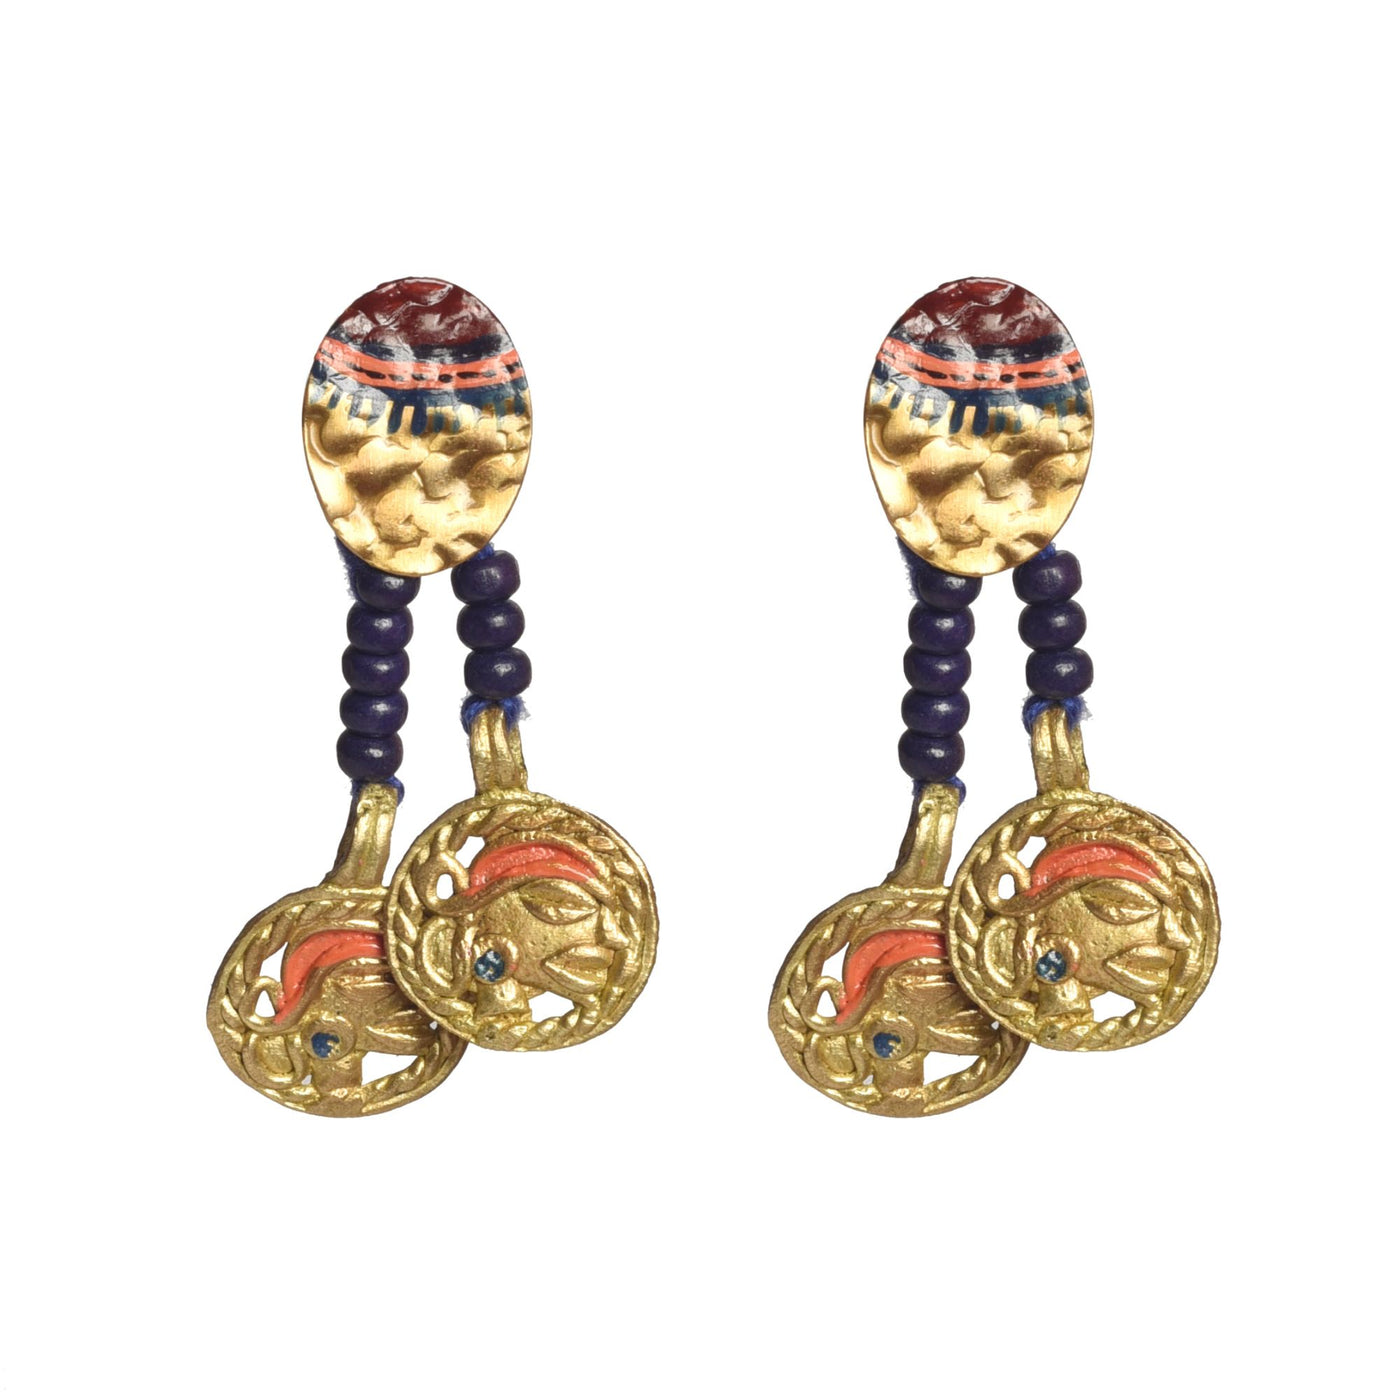 Queens Twins Handcrafted Tribal Earrings - Fashion & Lifestyle - 4